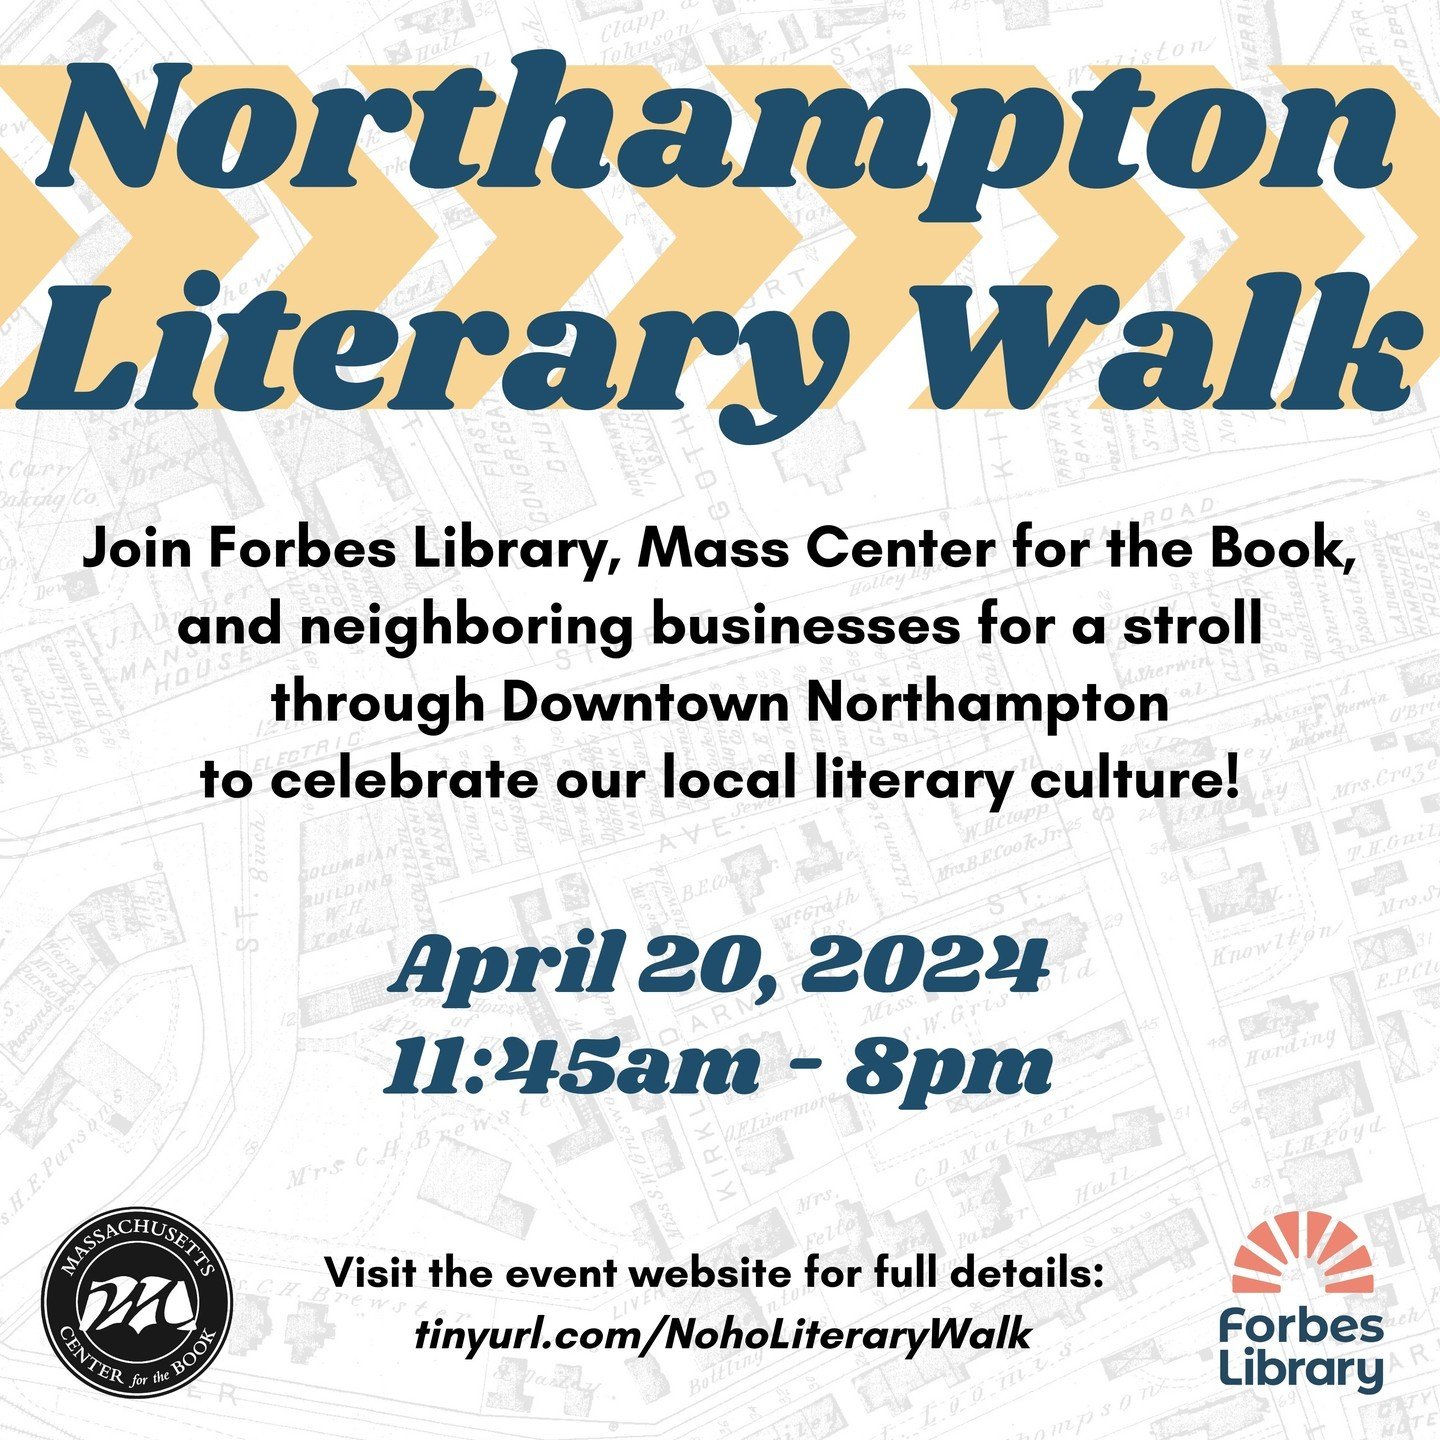 Join us Saturday for the Northampton Literary Walk! Celebrate #northamptonma's #literary spirit &amp; #NationalPoetryMonth w/ #author events, #poetry, local #history &amp; more! See Upcoming Events in bio. #pioneervalley #CenterForTheBook @forbeslibr